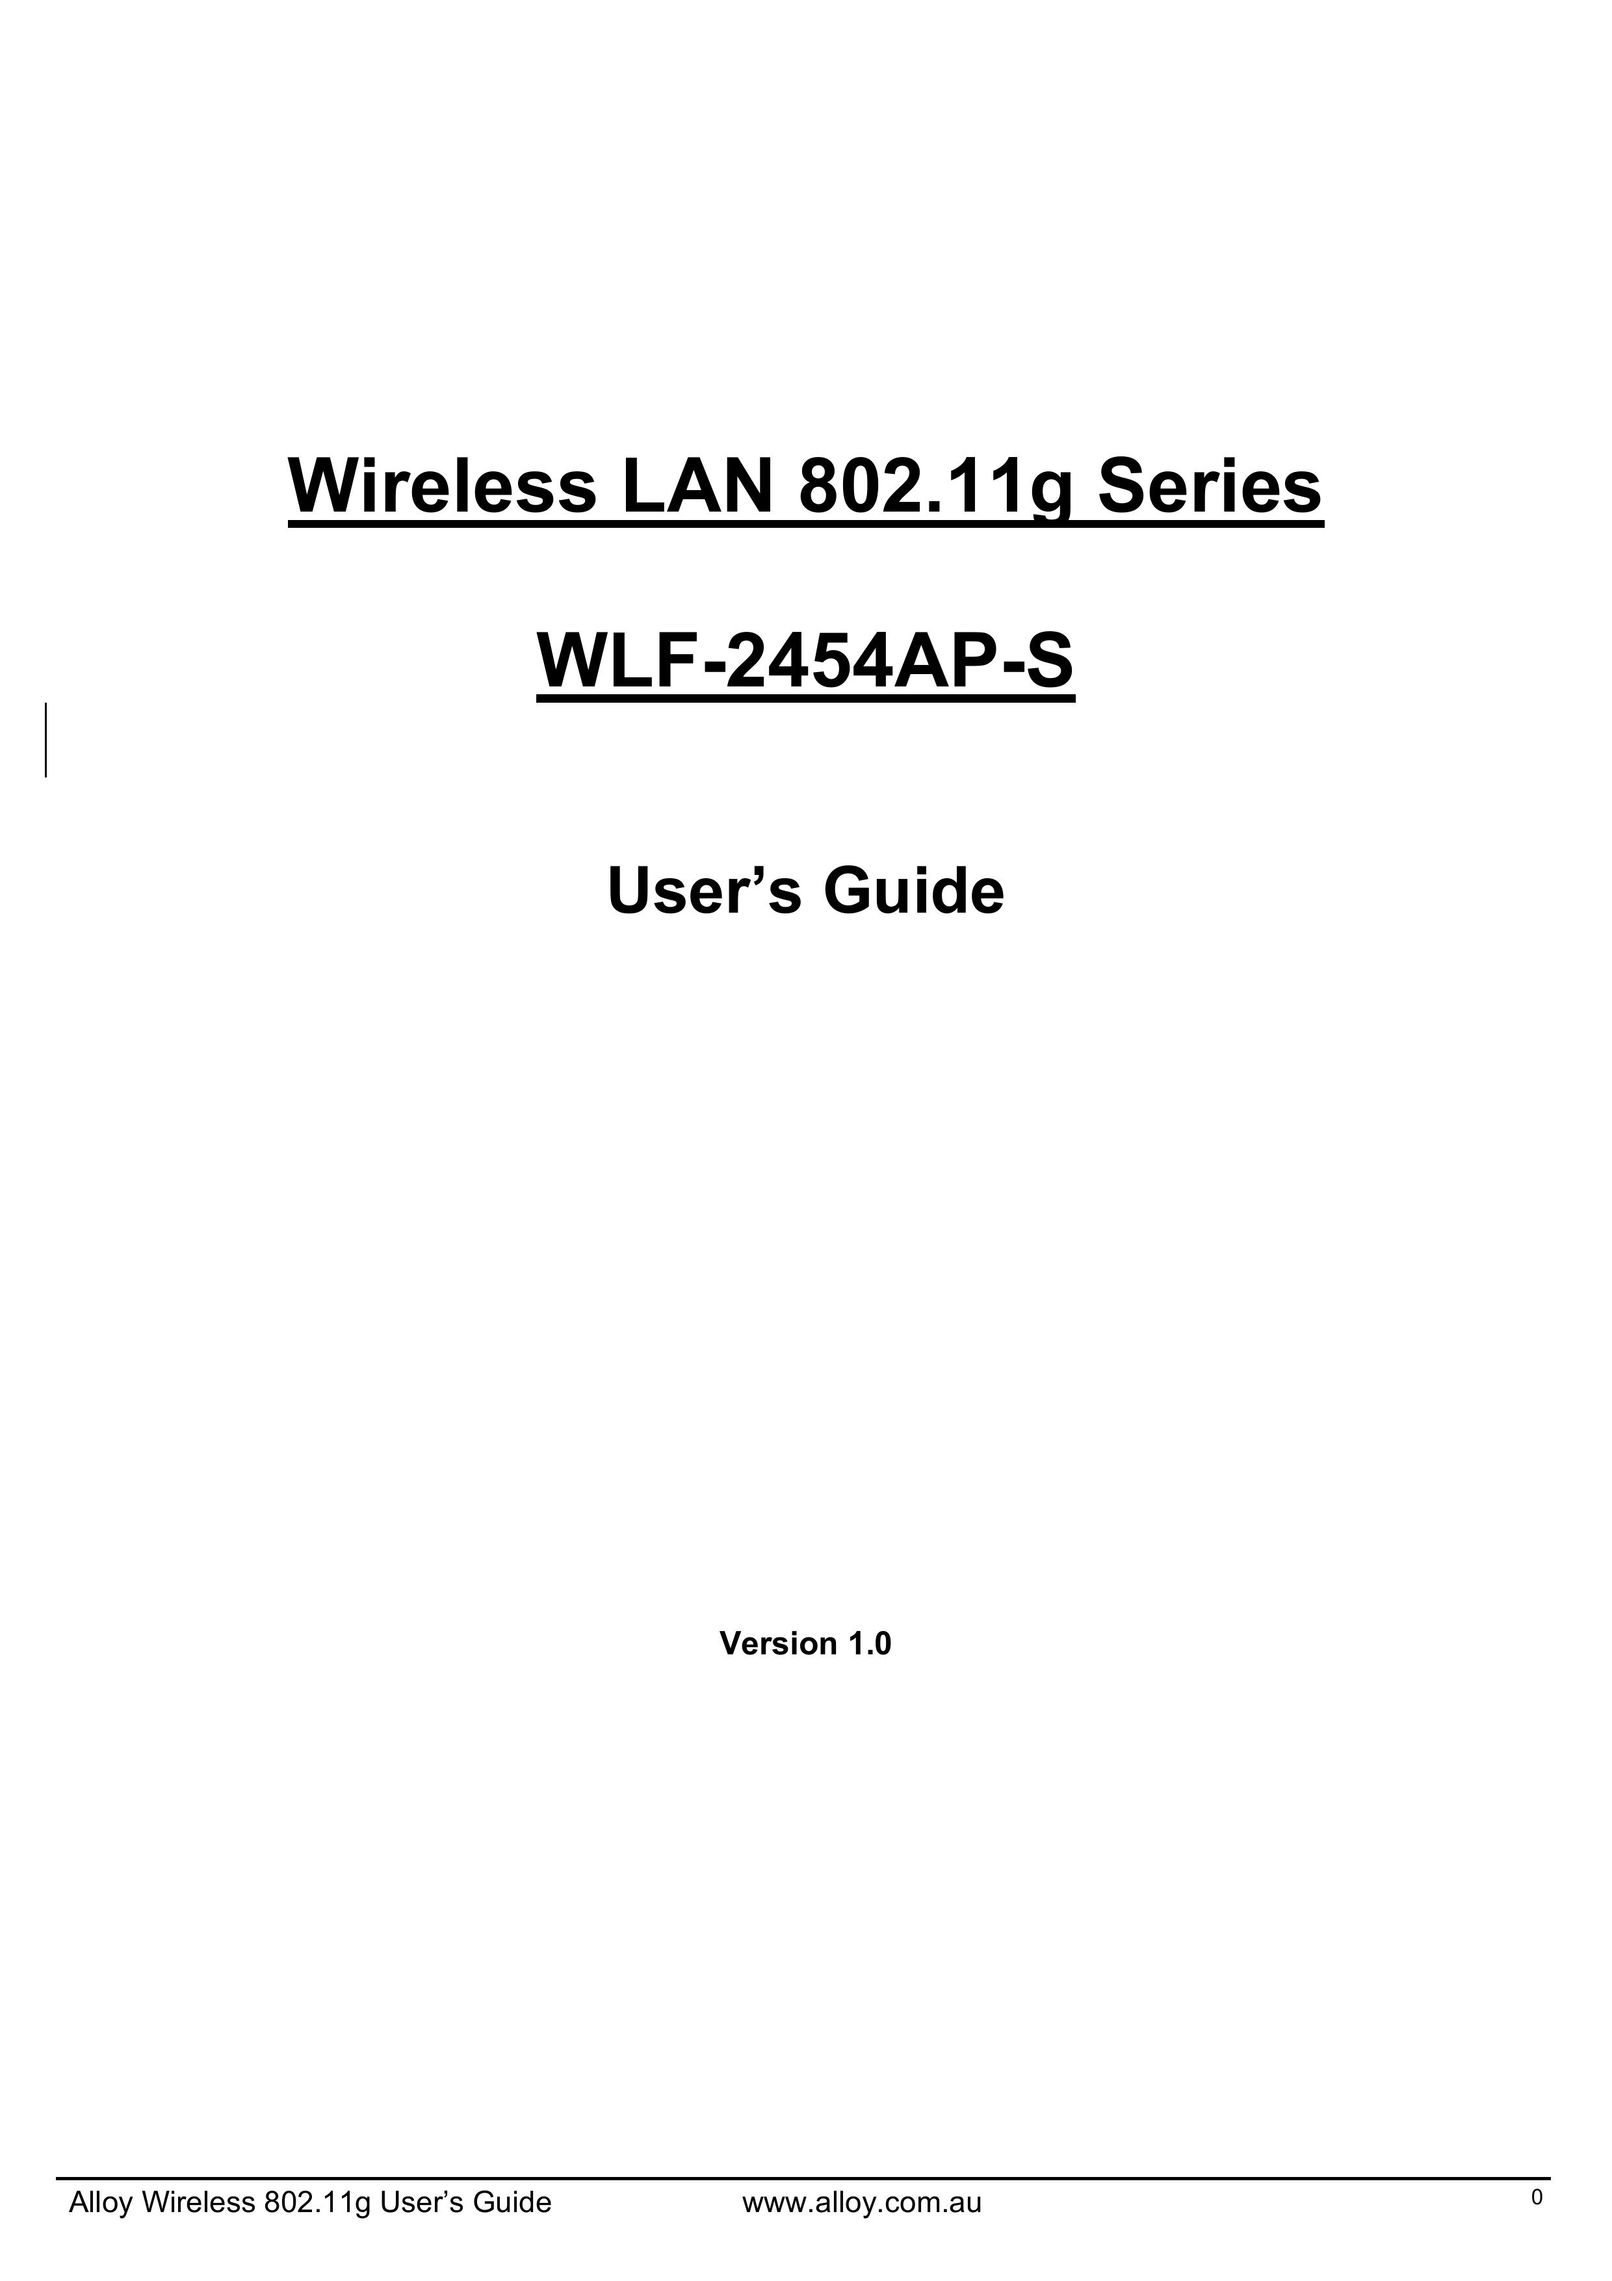 Alloy Computer Products WLF2454AP-S Network Router User Manual